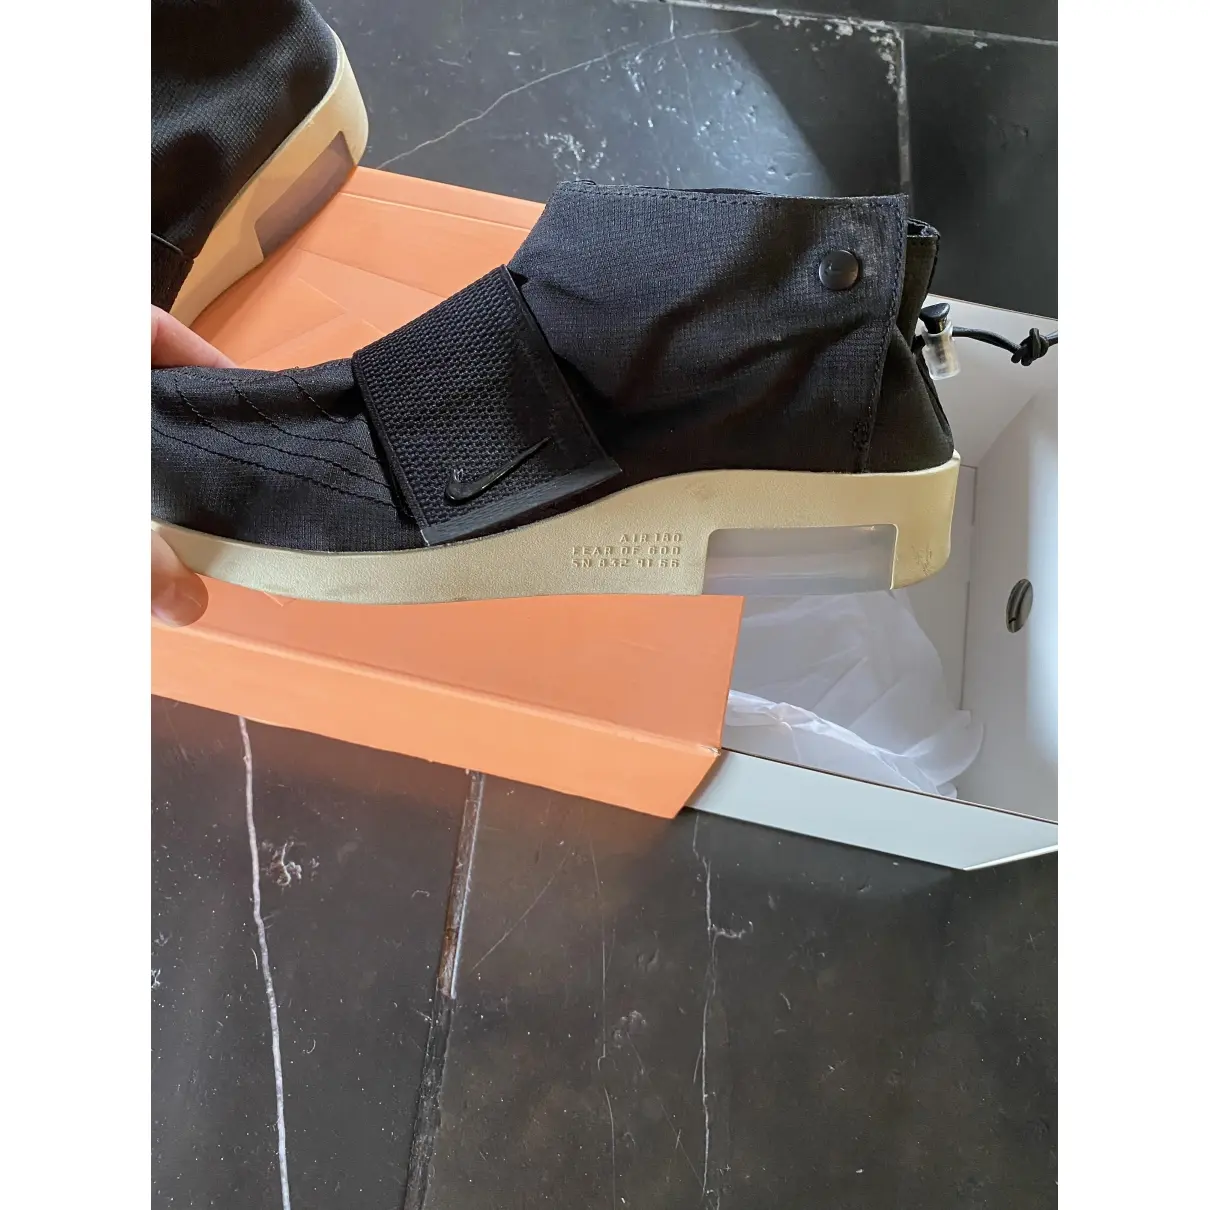 Nike x Fear of God Moccasin cloth high trainers for sale